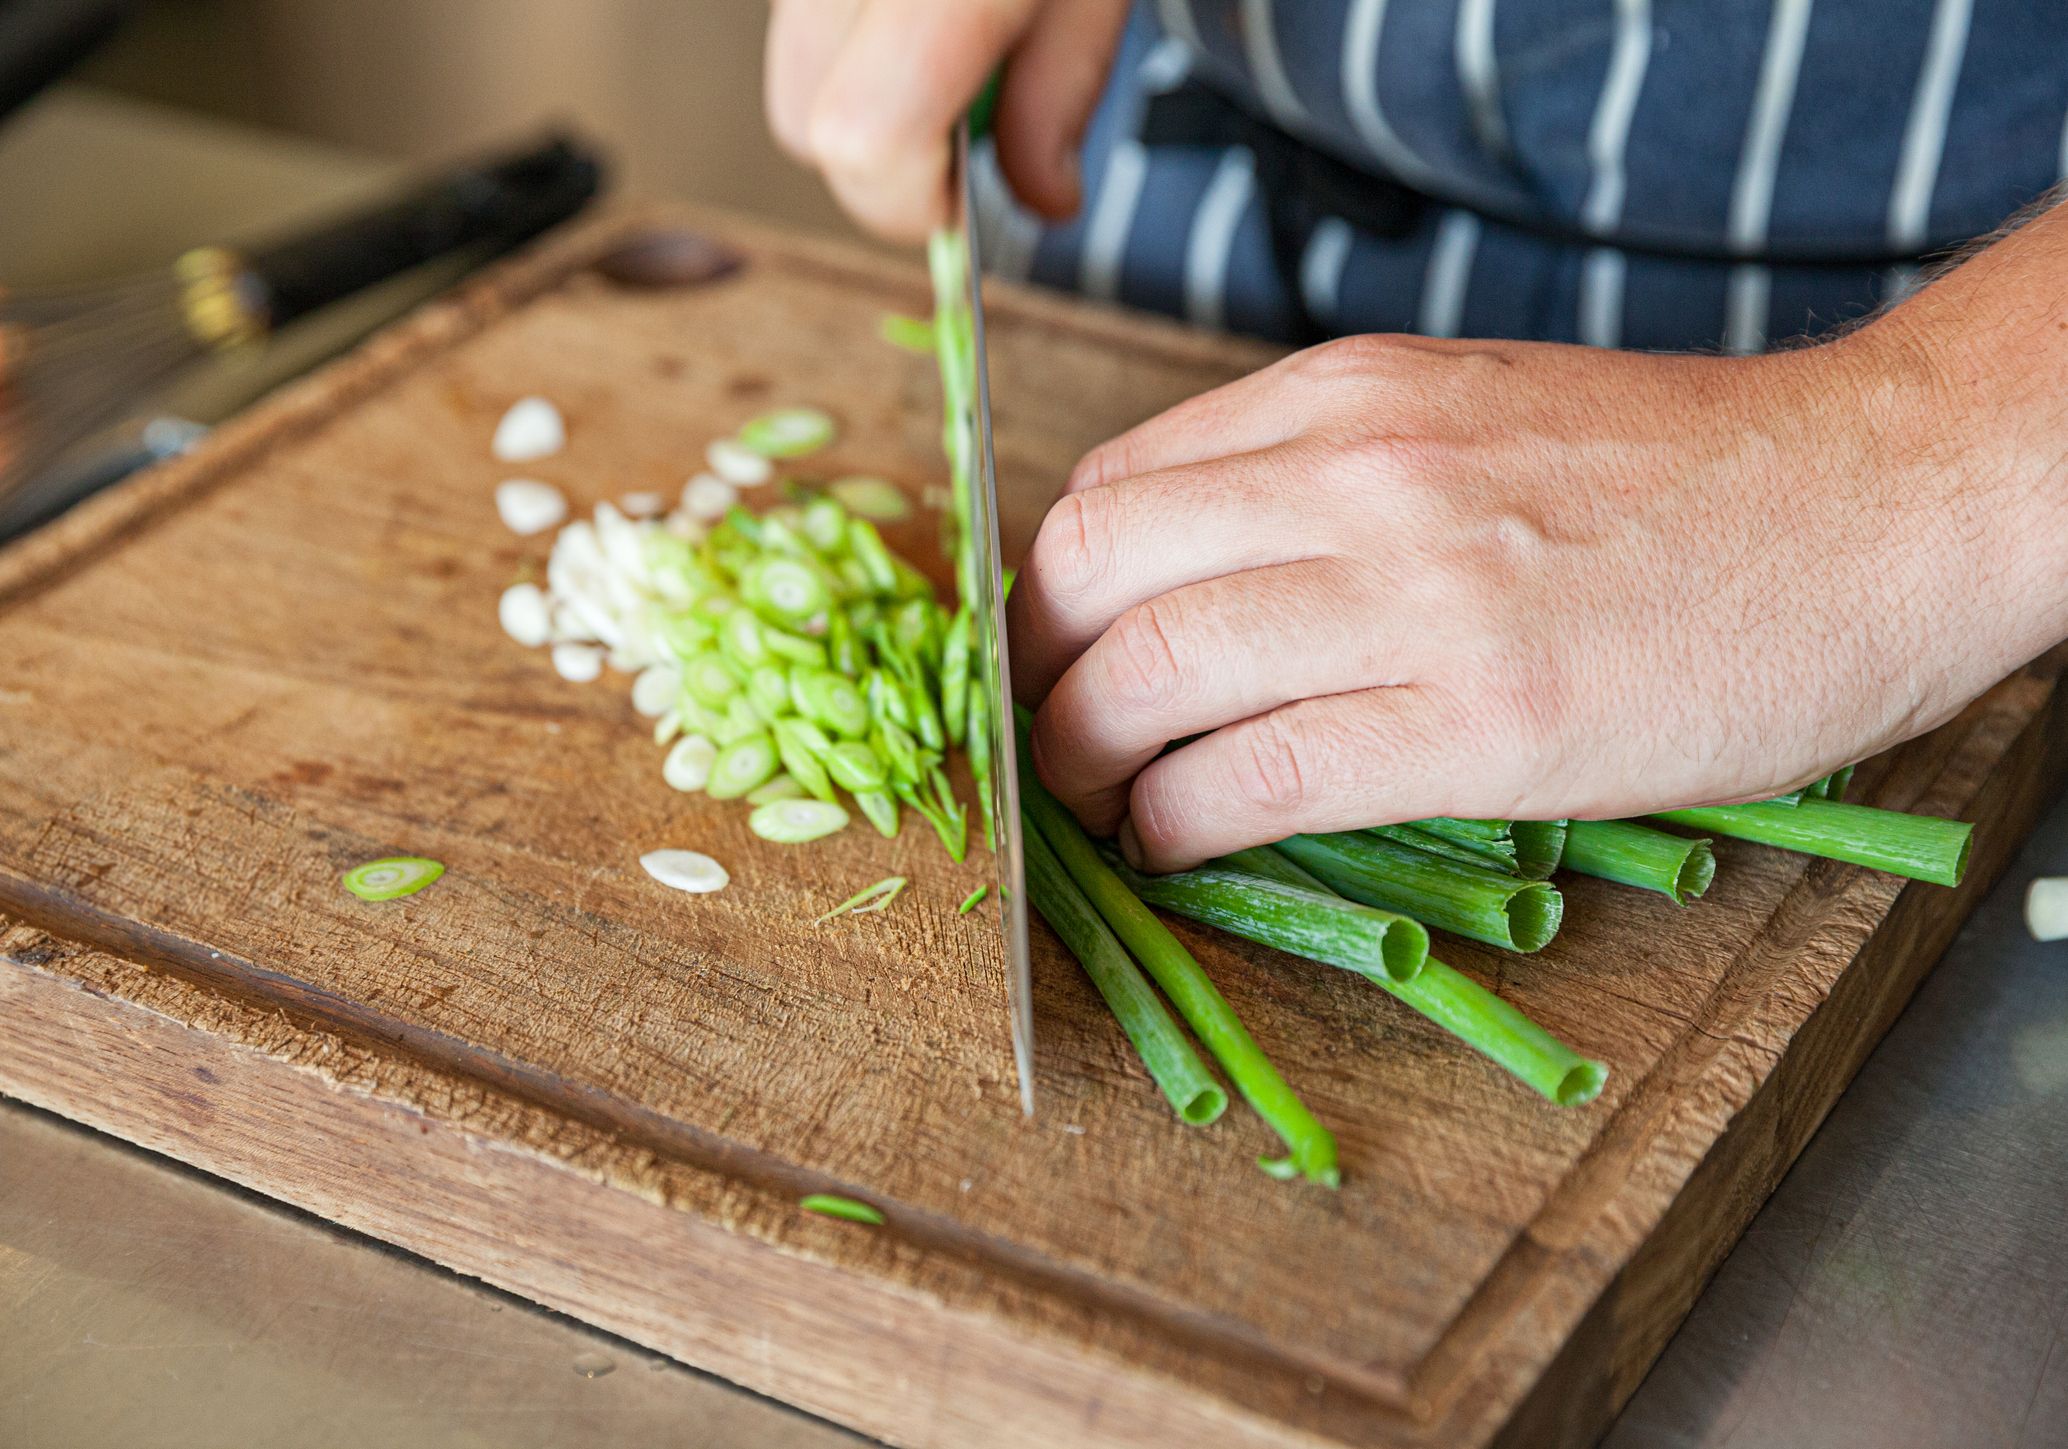 https://hips.hearstapps.com/hmg-prod/images/how-to-cut-spring-onions-1644851342.jpg